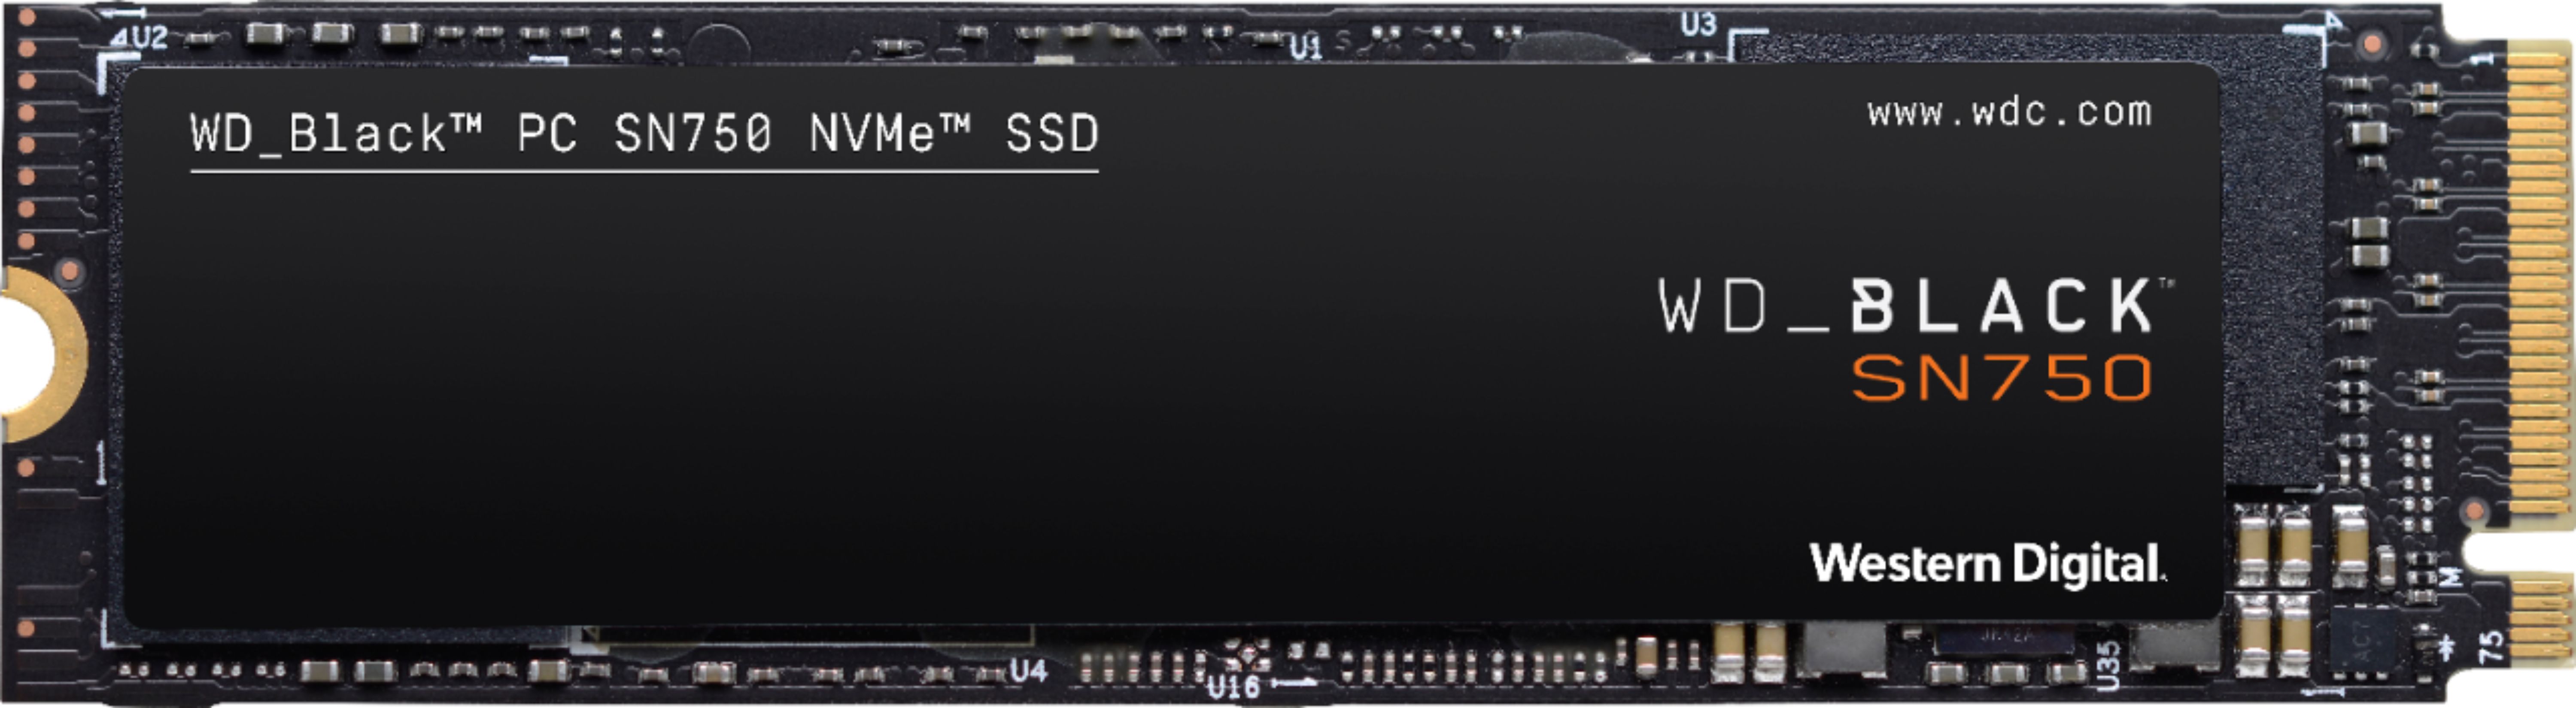 WD - WD_BLACK SN750 NVMe Gaming 1TB PCIe Gen 3 x4 Internal Solid State Drive $109.99